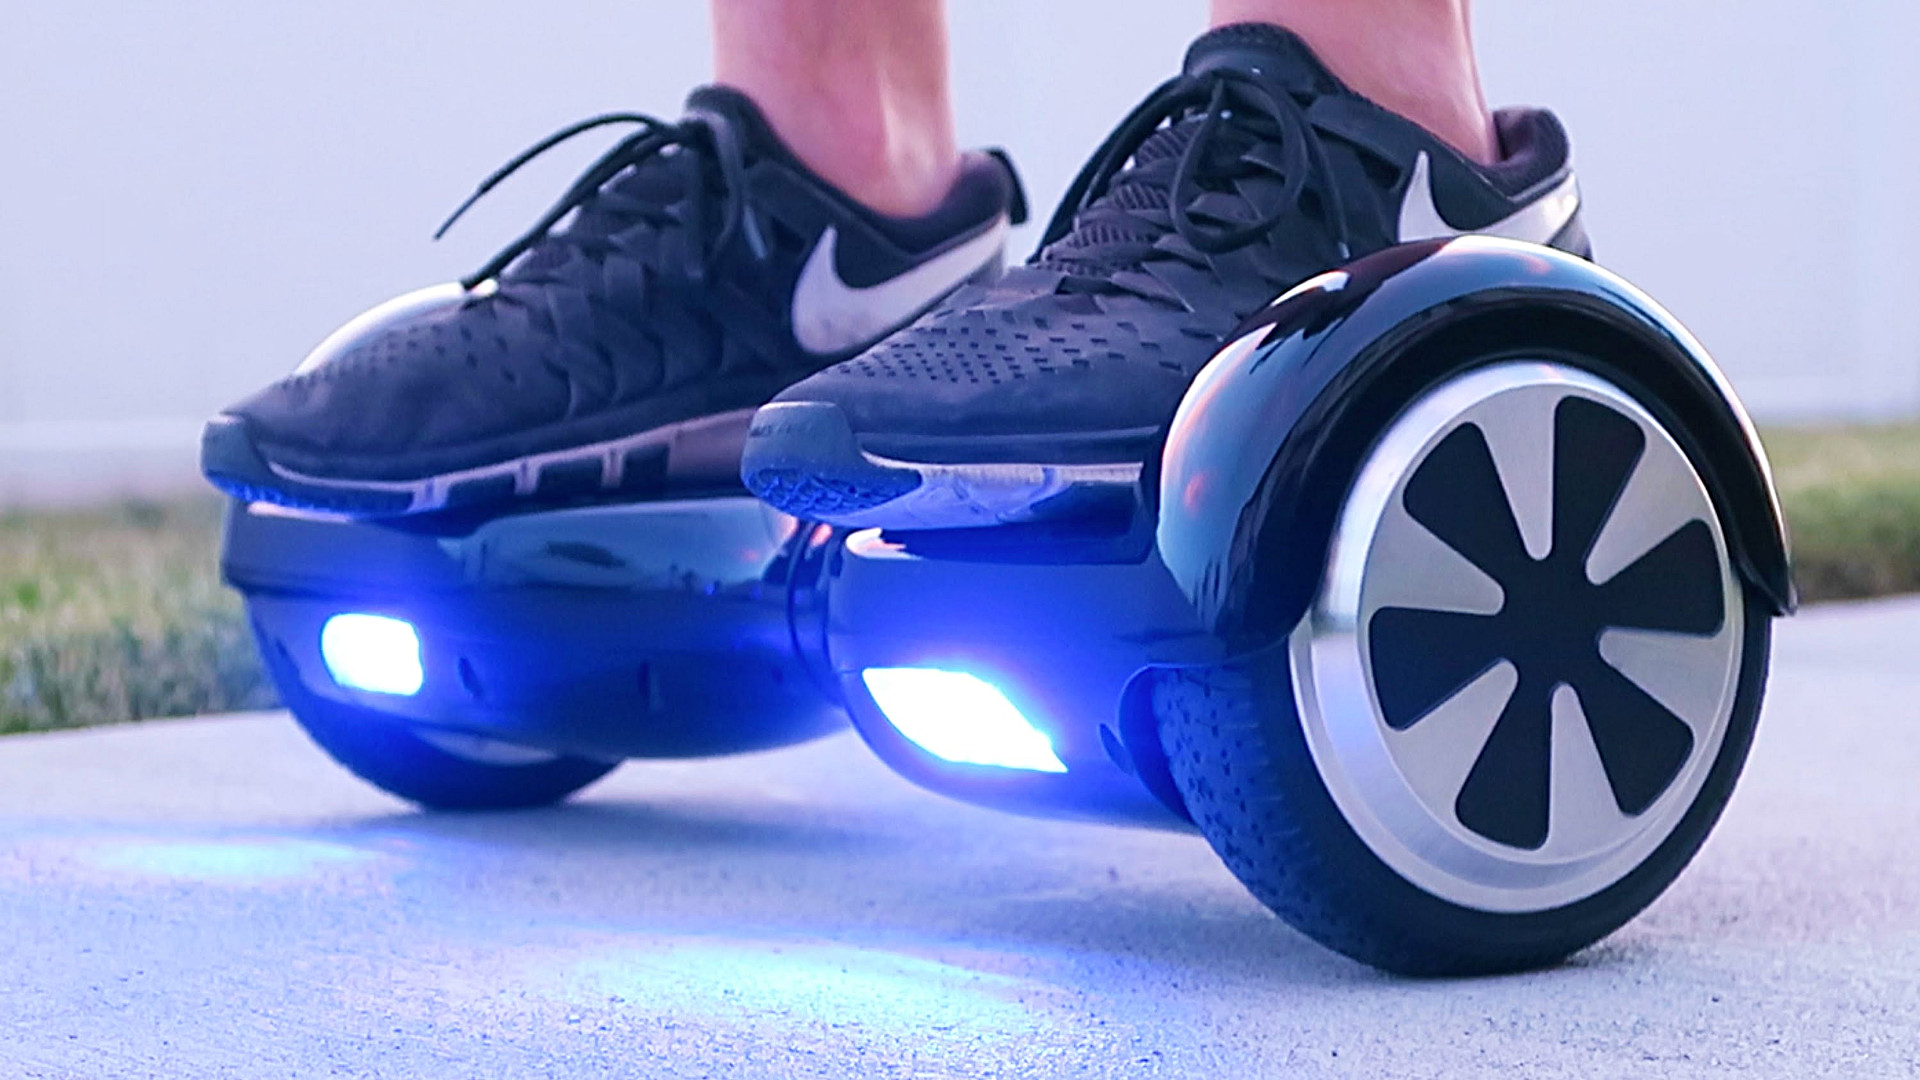 WHY A HOVERBOARD WILL BE THE PERFECT GIFT FOR YOUR KID